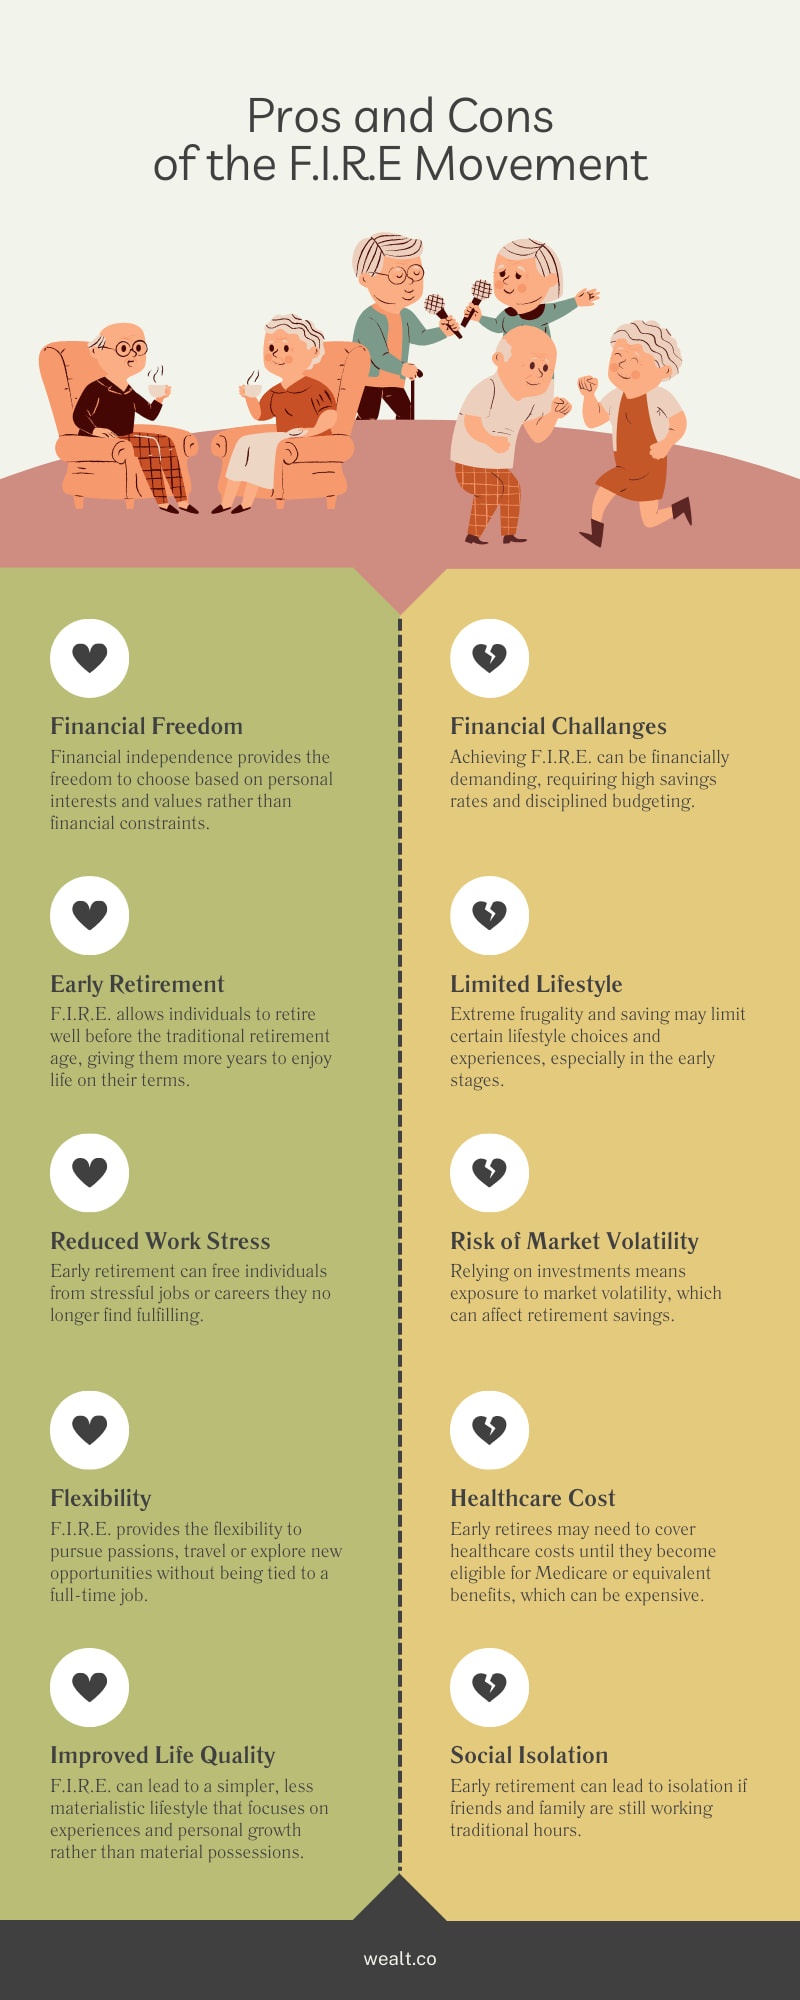 Pros and cons of the FIRE movement infographic